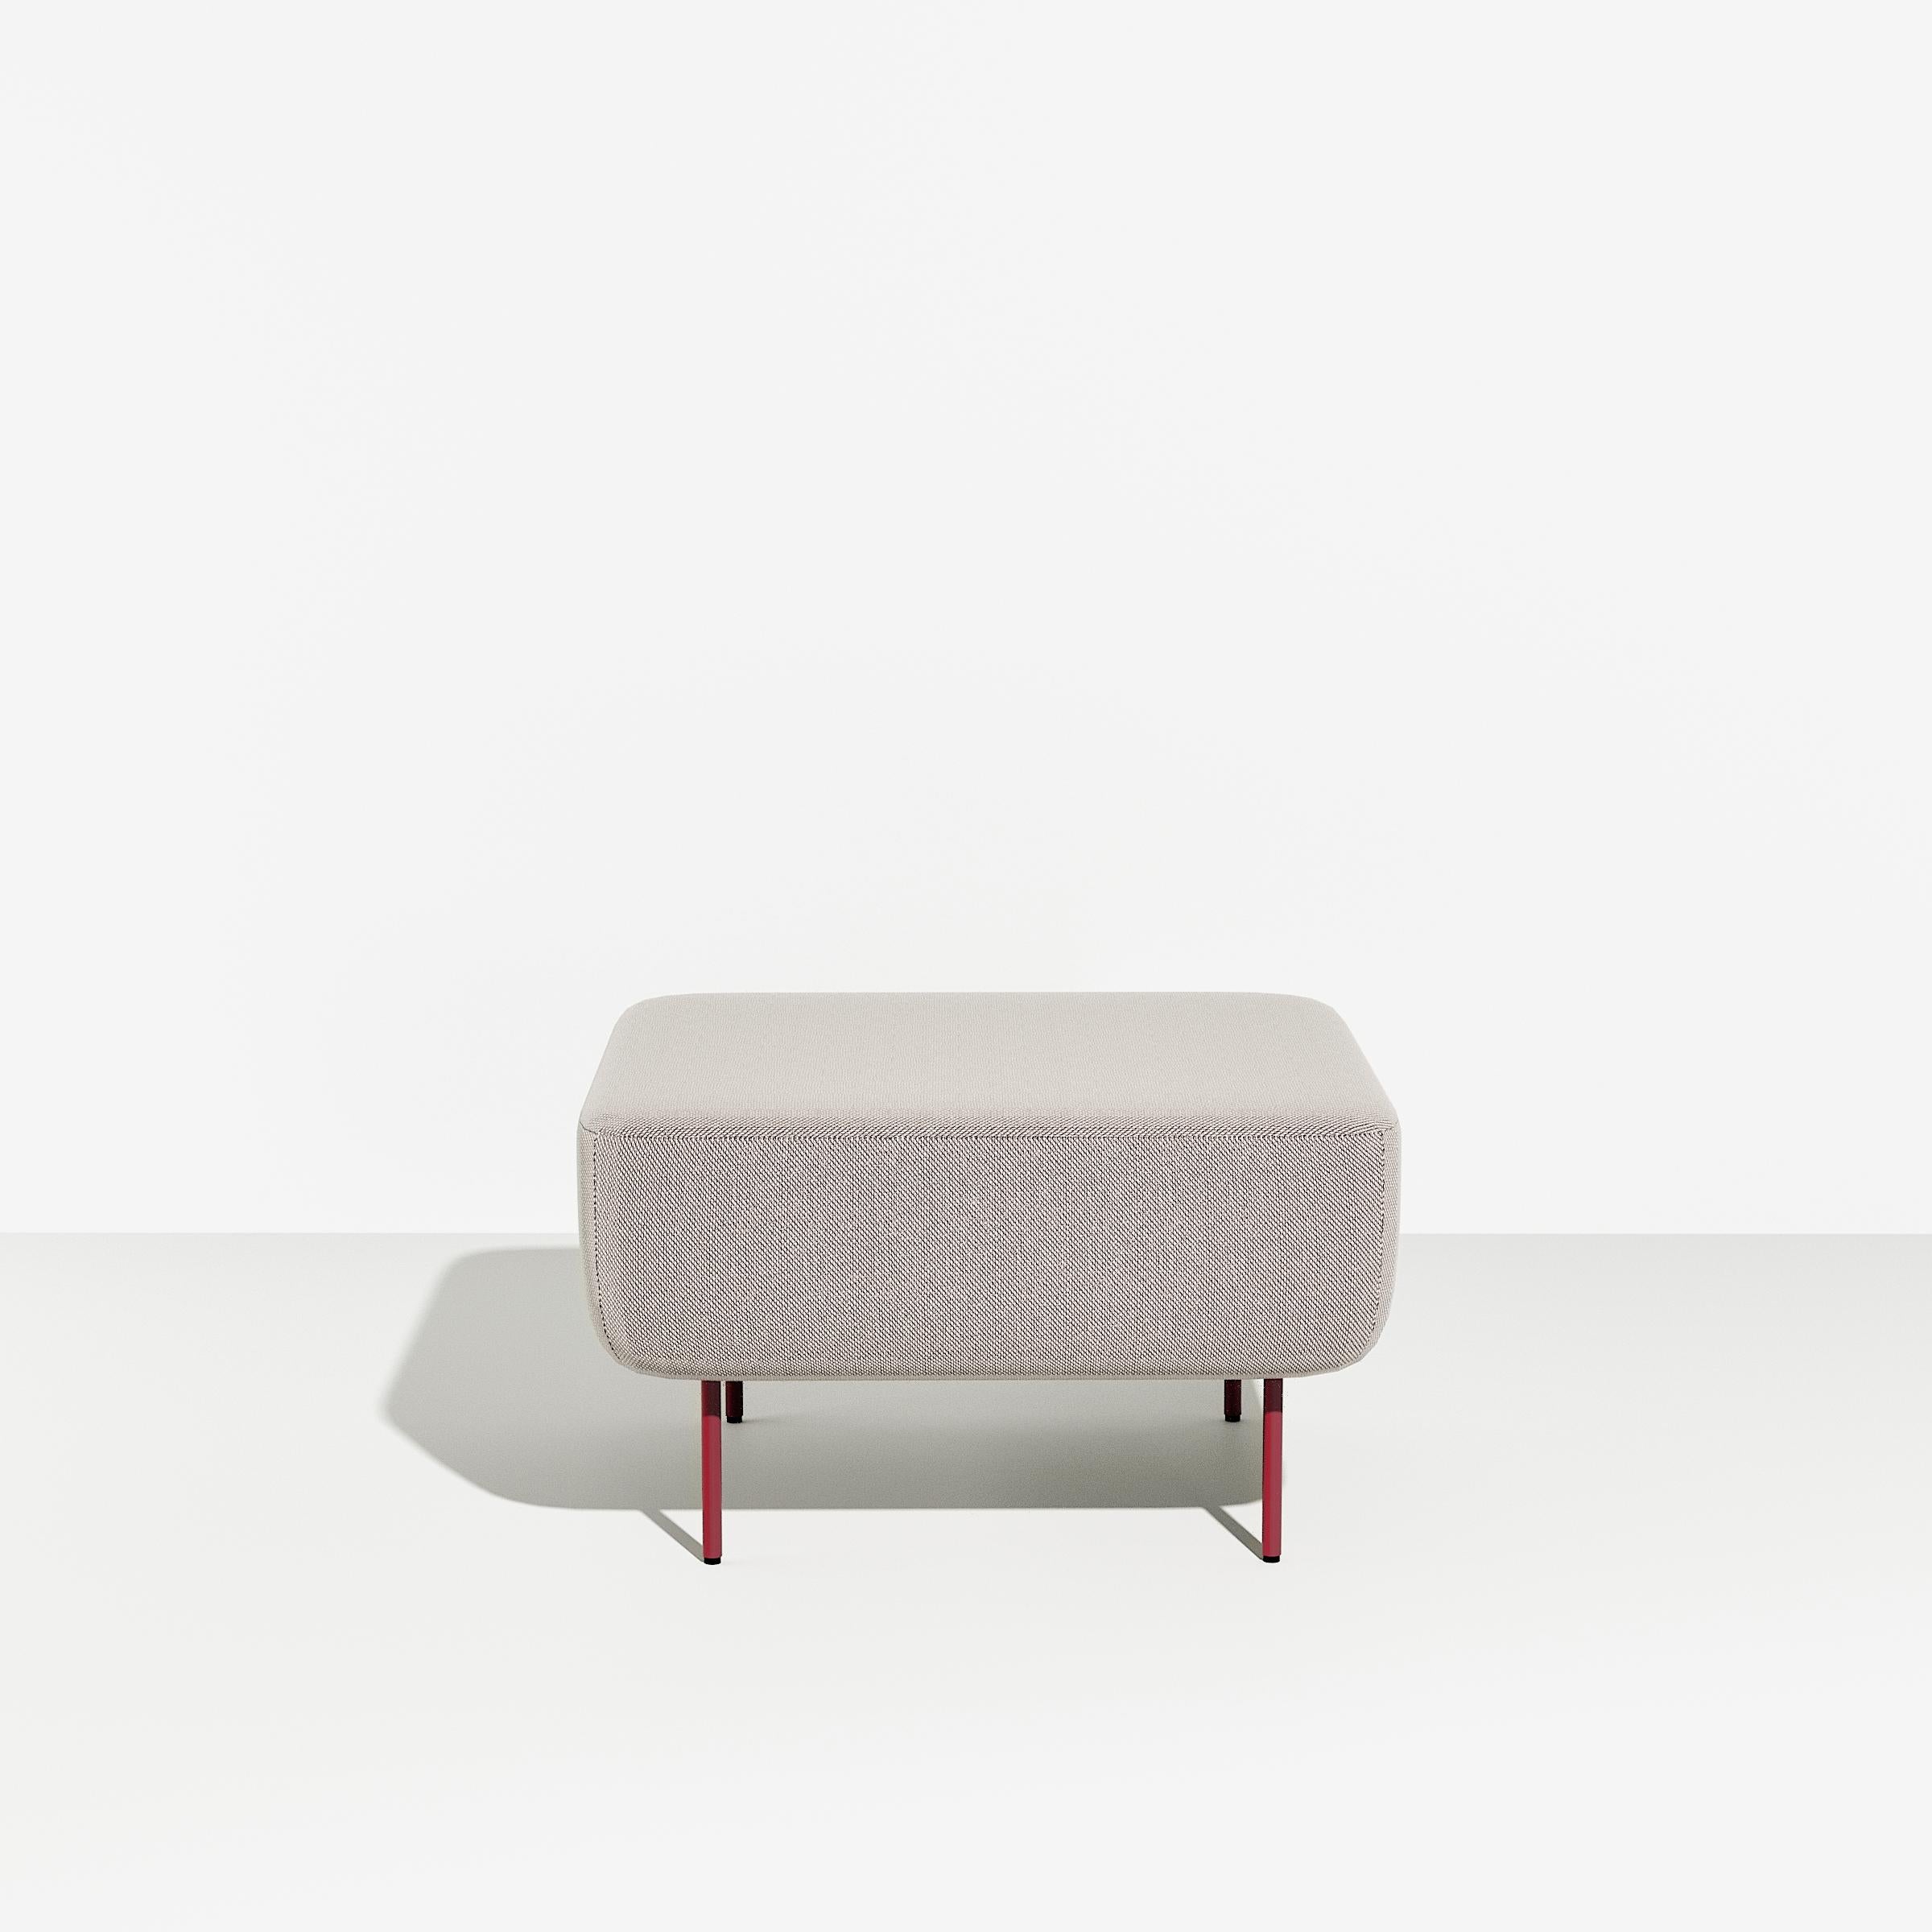 Petite Friture Medium Hoff Stool in Grey-beige by Morten & Jonas, 2015

Hoff created by designer duo Morten & Jonas is a collection of two modular stools and two modular armchairs. they can combine to make a sofa as well an entire living room